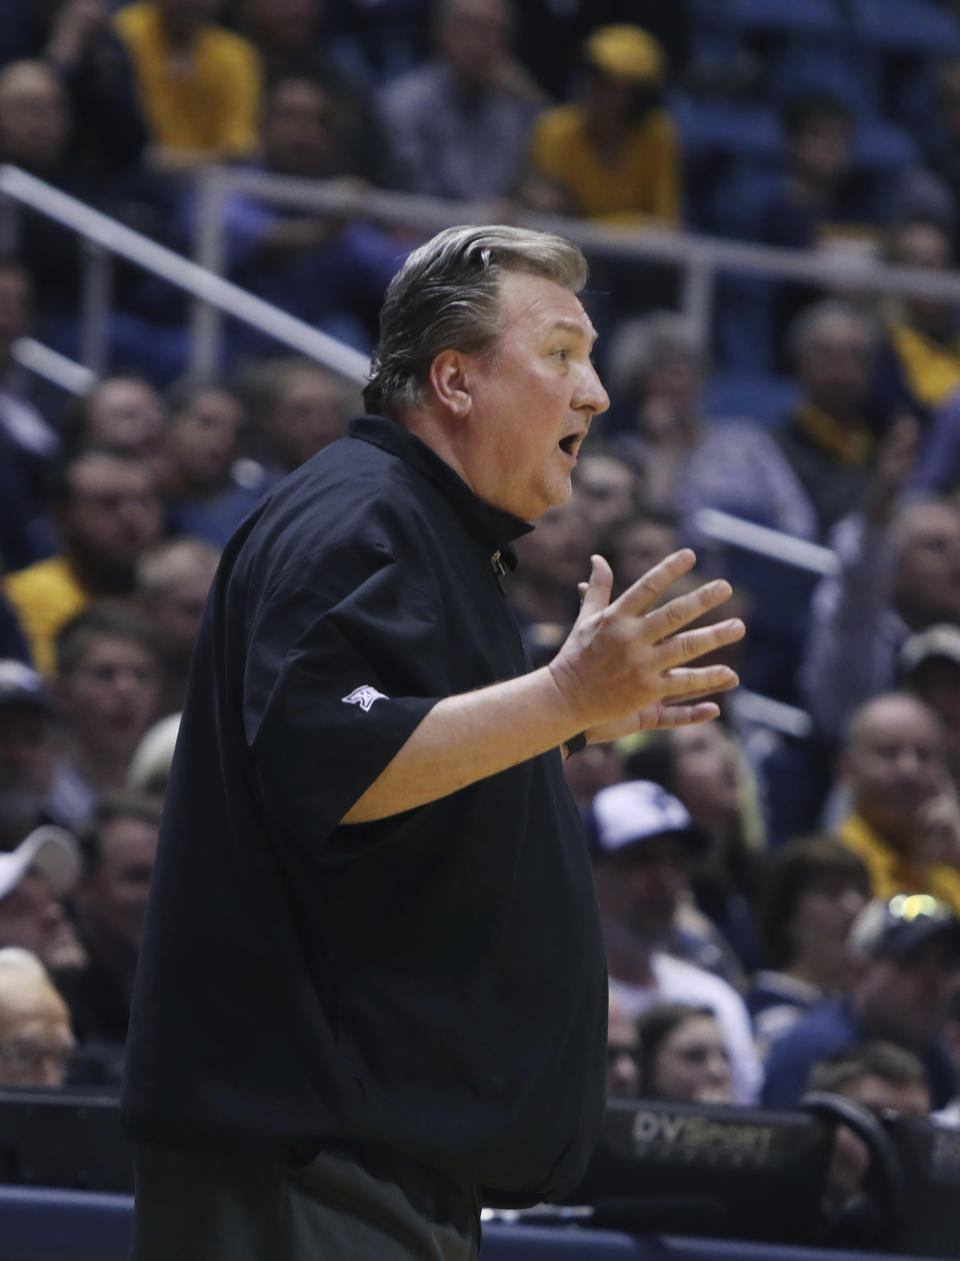 West Virginia head coach Bob Huggins reacts to a referee call during the second half of an NCAA college basketball game against Texas, Monday, Feb. 20, 2017, in Morgantown, W.Va. West Virginia defeated Texas 77-62. (AP Photo/Raymond Thompson)